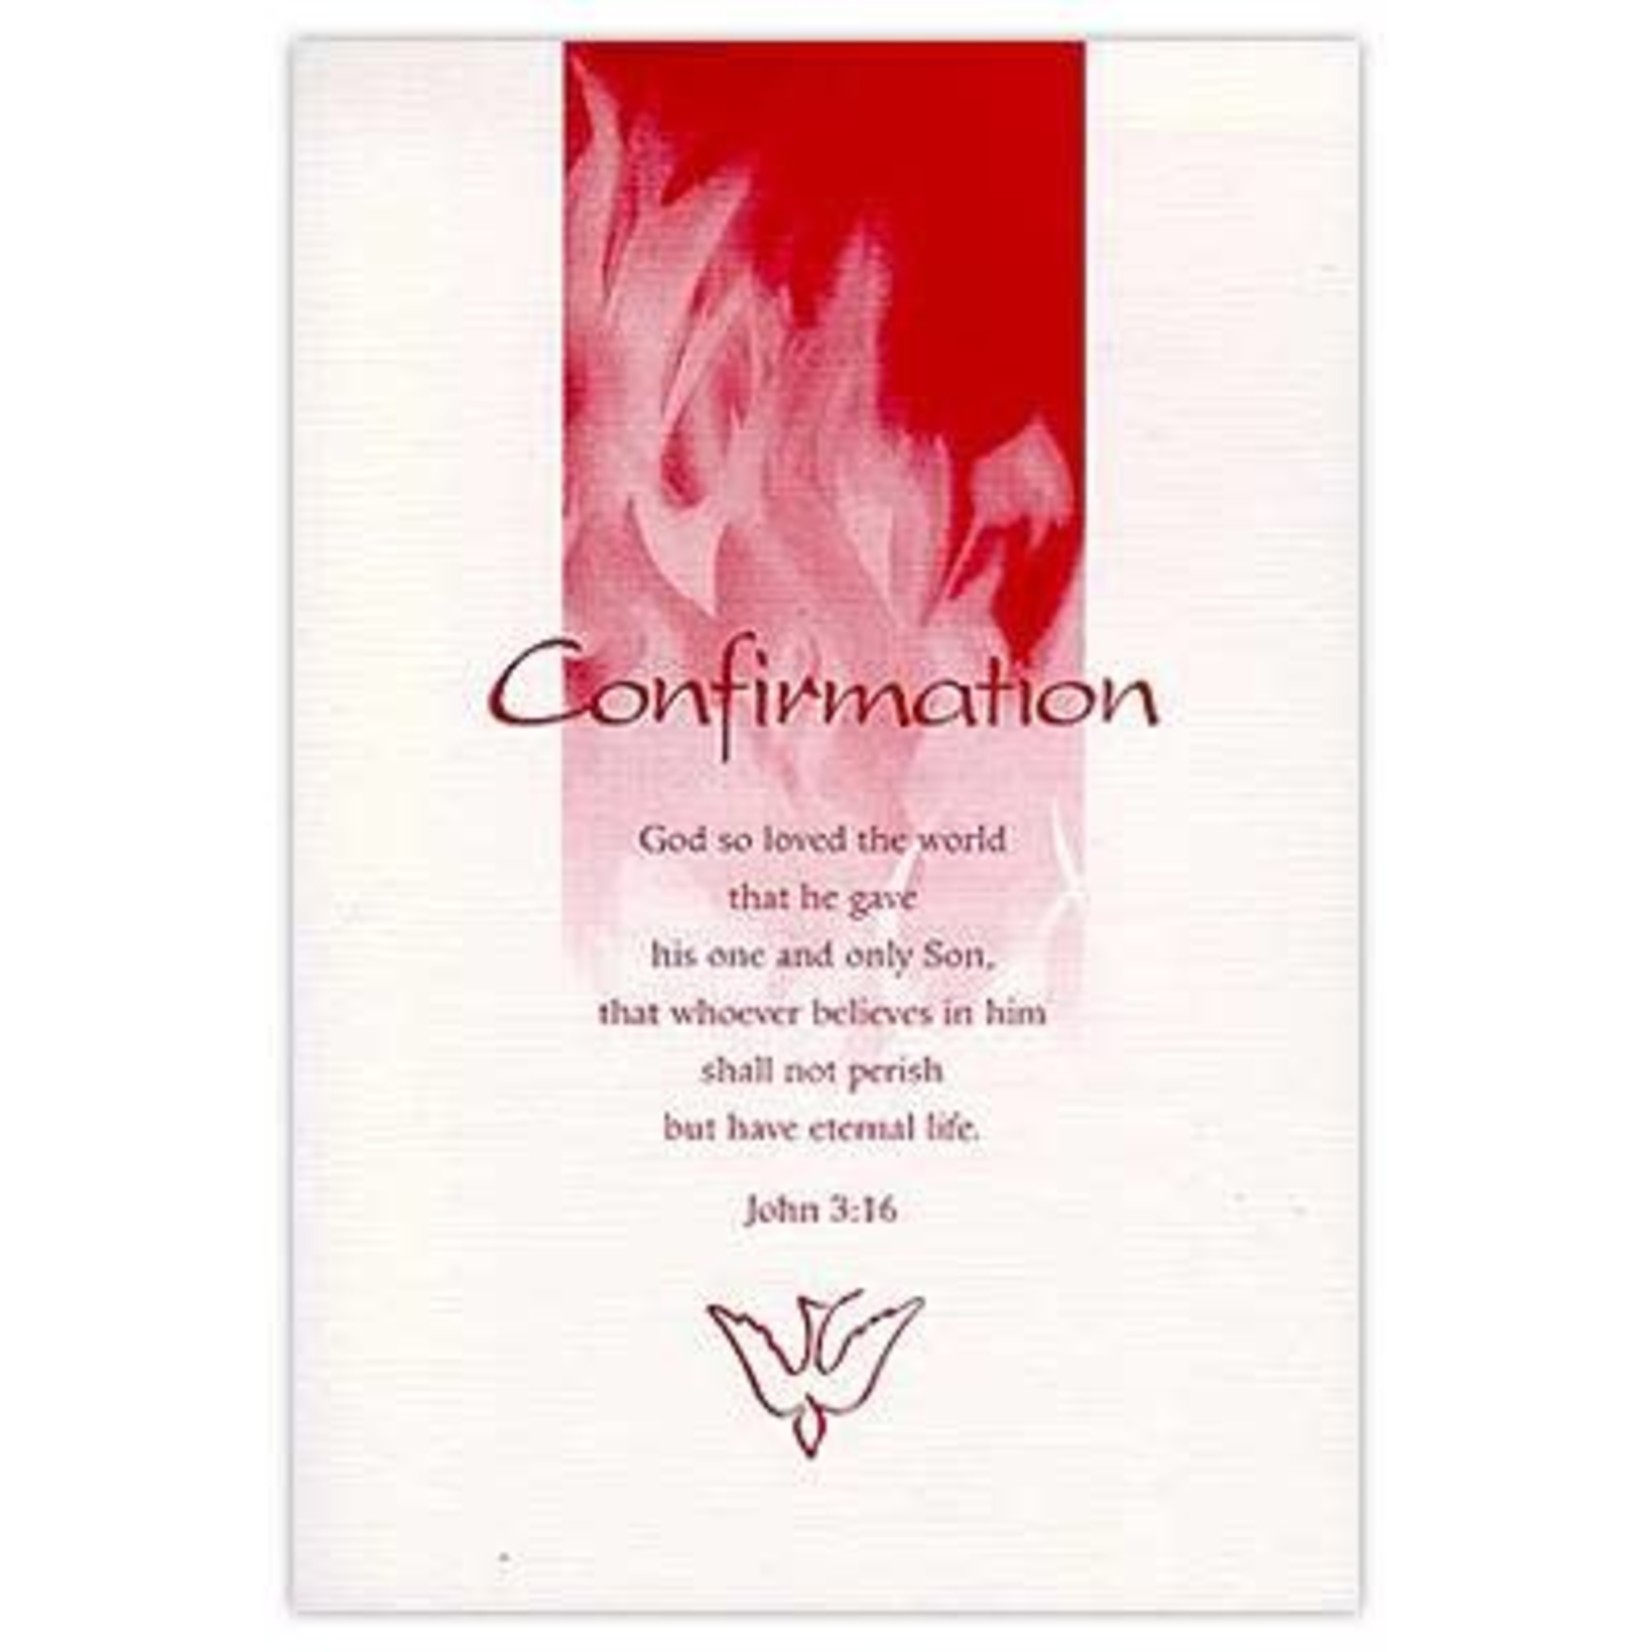 Northwestern Publishing House Confirmation Certificate - Various Verses